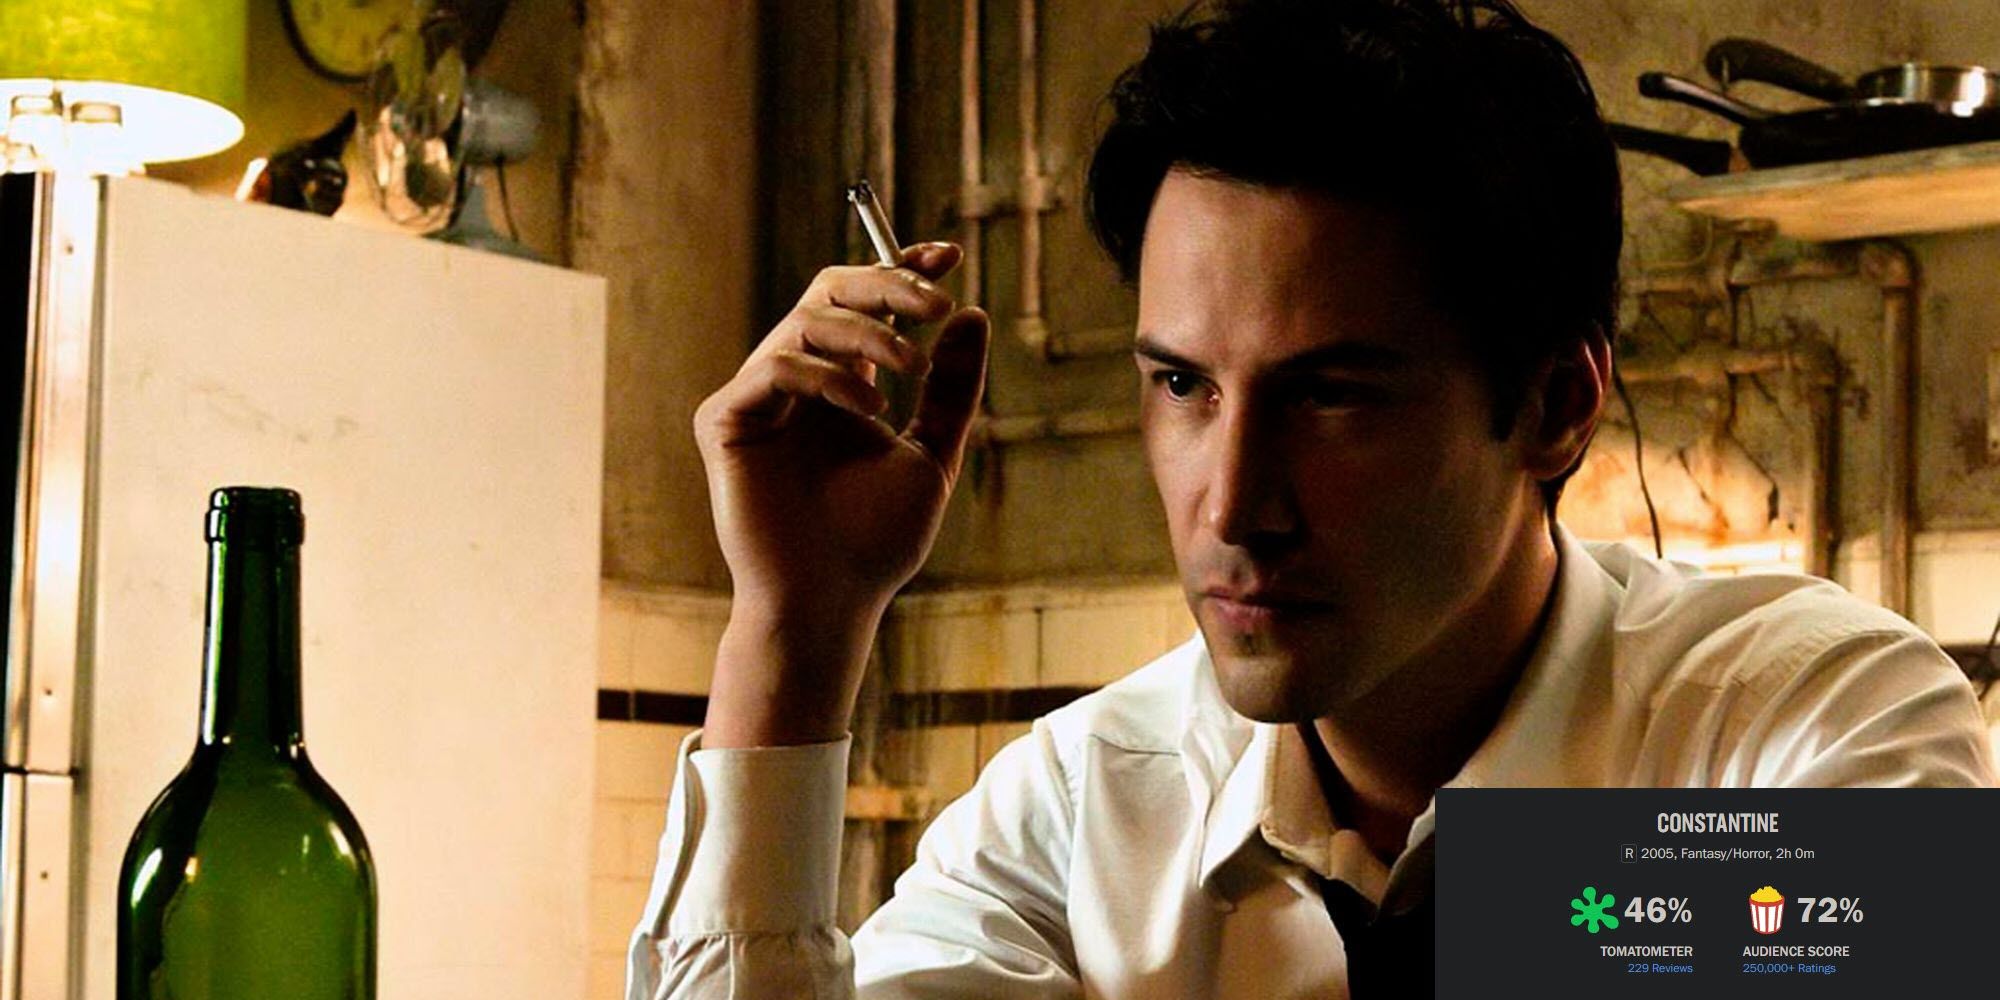 image of Keanu Reeves as Constantine in the 2005 movie Constantine with a cigarette in hand